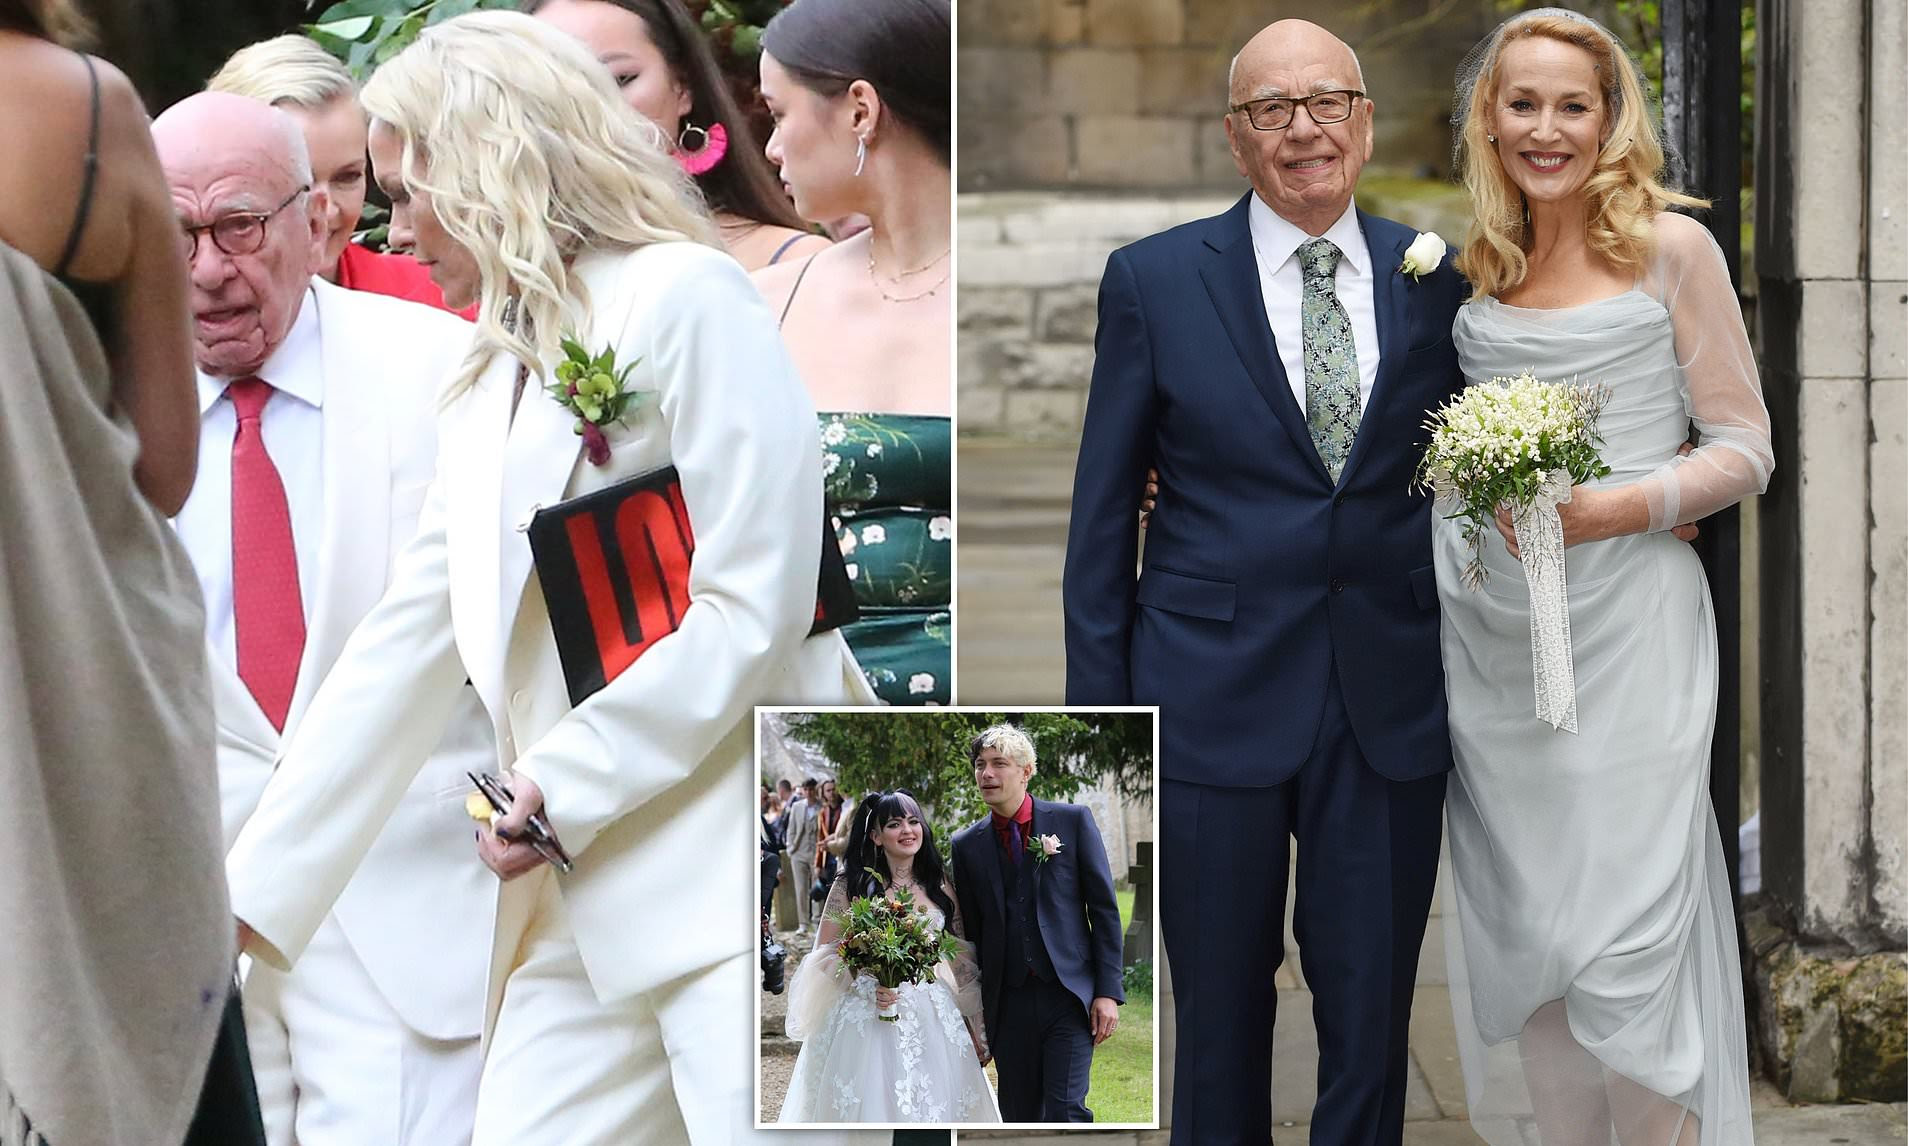 Jerry Hall served Rupert Murdoch divorce papers as he boarded jet after granddaughter's wedding